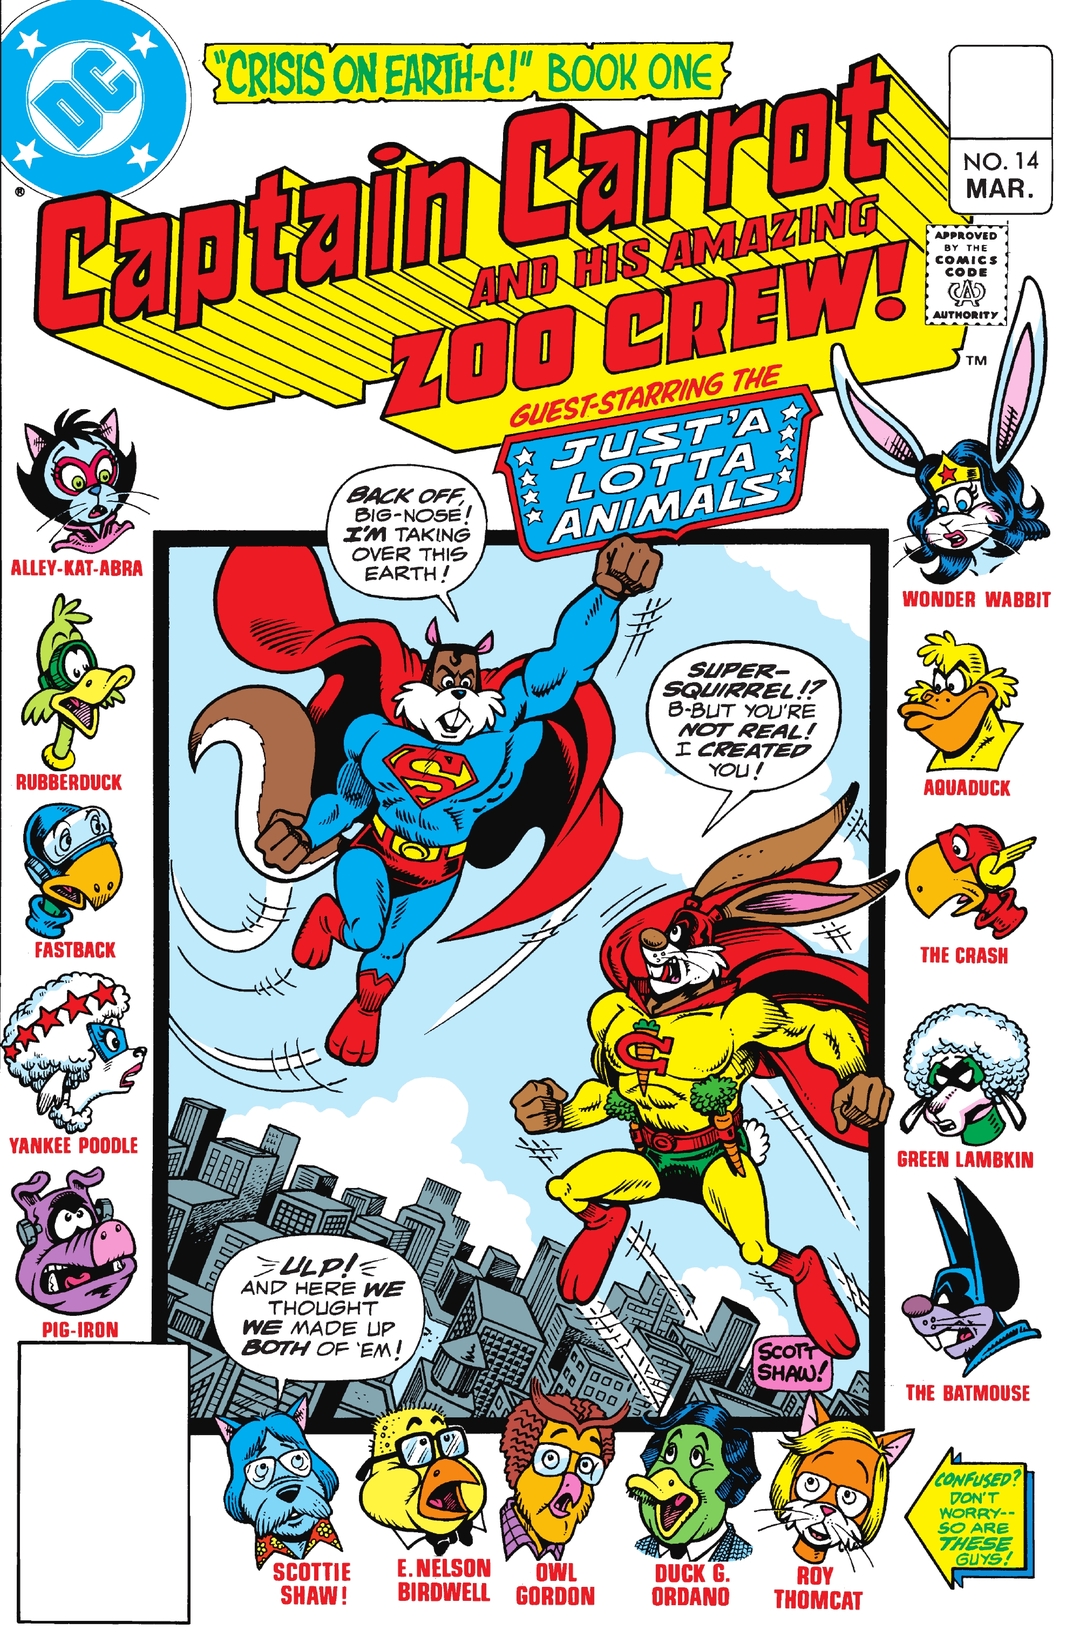 Captain Carrot and His Amazing Zoo Crew #14 preview images